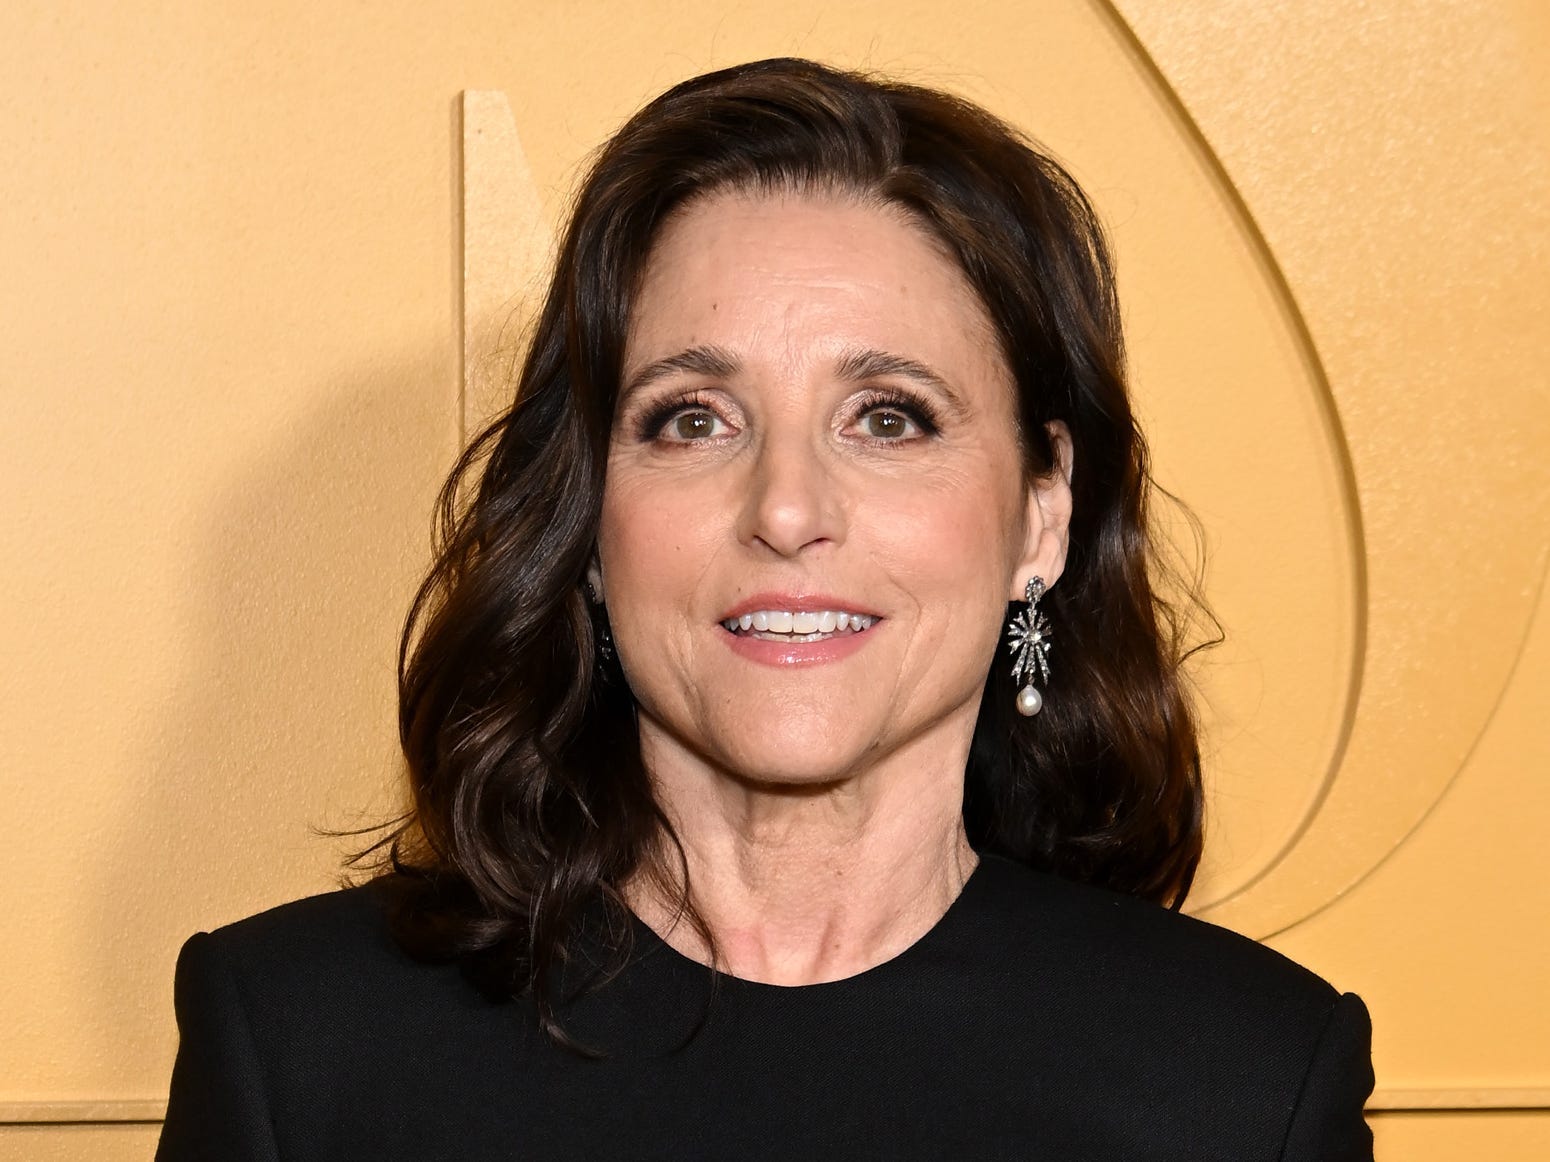 <p>Louis-Dreyfus has convincingly broken what came to be known as the "<a href="https://www.cbsnews.com/news/julia-louis-dreyfus-ends-seinfeld-curse/">Seinfeld curse</a>" since the sitcom ended.</p><p>She took her talents to her own show, CBS's "The New Adventures of Old Christine," where she <a href="https://www.imdb.com/title/tt0462128/?ref_=nm_flmg_act_20">won an Emmy</a>.</p><p>Louis-Dreyfus followed that up with HBO's "Veep," where she played American Vice President Selina Meyer until the show ended in 2019. That role earned her a <a href="https://www.businessinsider.com/julia-louis-dreyfus-comes-short-of-making-emmy-history-2019-9">record-setting</a> six consecutive Emmys. </p><p>She received the <a href="https://www.kennedy-center.org/artists/l/lo-lz/julia-louis-dreyfus/">Mark Twain Prize for American Humor</a> — one of America's highest achievements in comedy — in 2018. </p><p>She also voiced characters in the animated films "A Bug's Life" (1998), "Planes" (2013), and "Onward" (2020).</p><p>In 2021, Louis-Dreyfus made her first appearance as Valentina Allegra de Fontaine in the <a href="https://www.businessinsider.com/falcon-and-the-winter-soldier-julia-louis-dreyfus-cameo-explained-2021-4">Marvel Cinematic Universe</a>. She's now set to produce and star in "Tangles," an animated movie based on a graphic novel about Alzheimer's disease. </p>